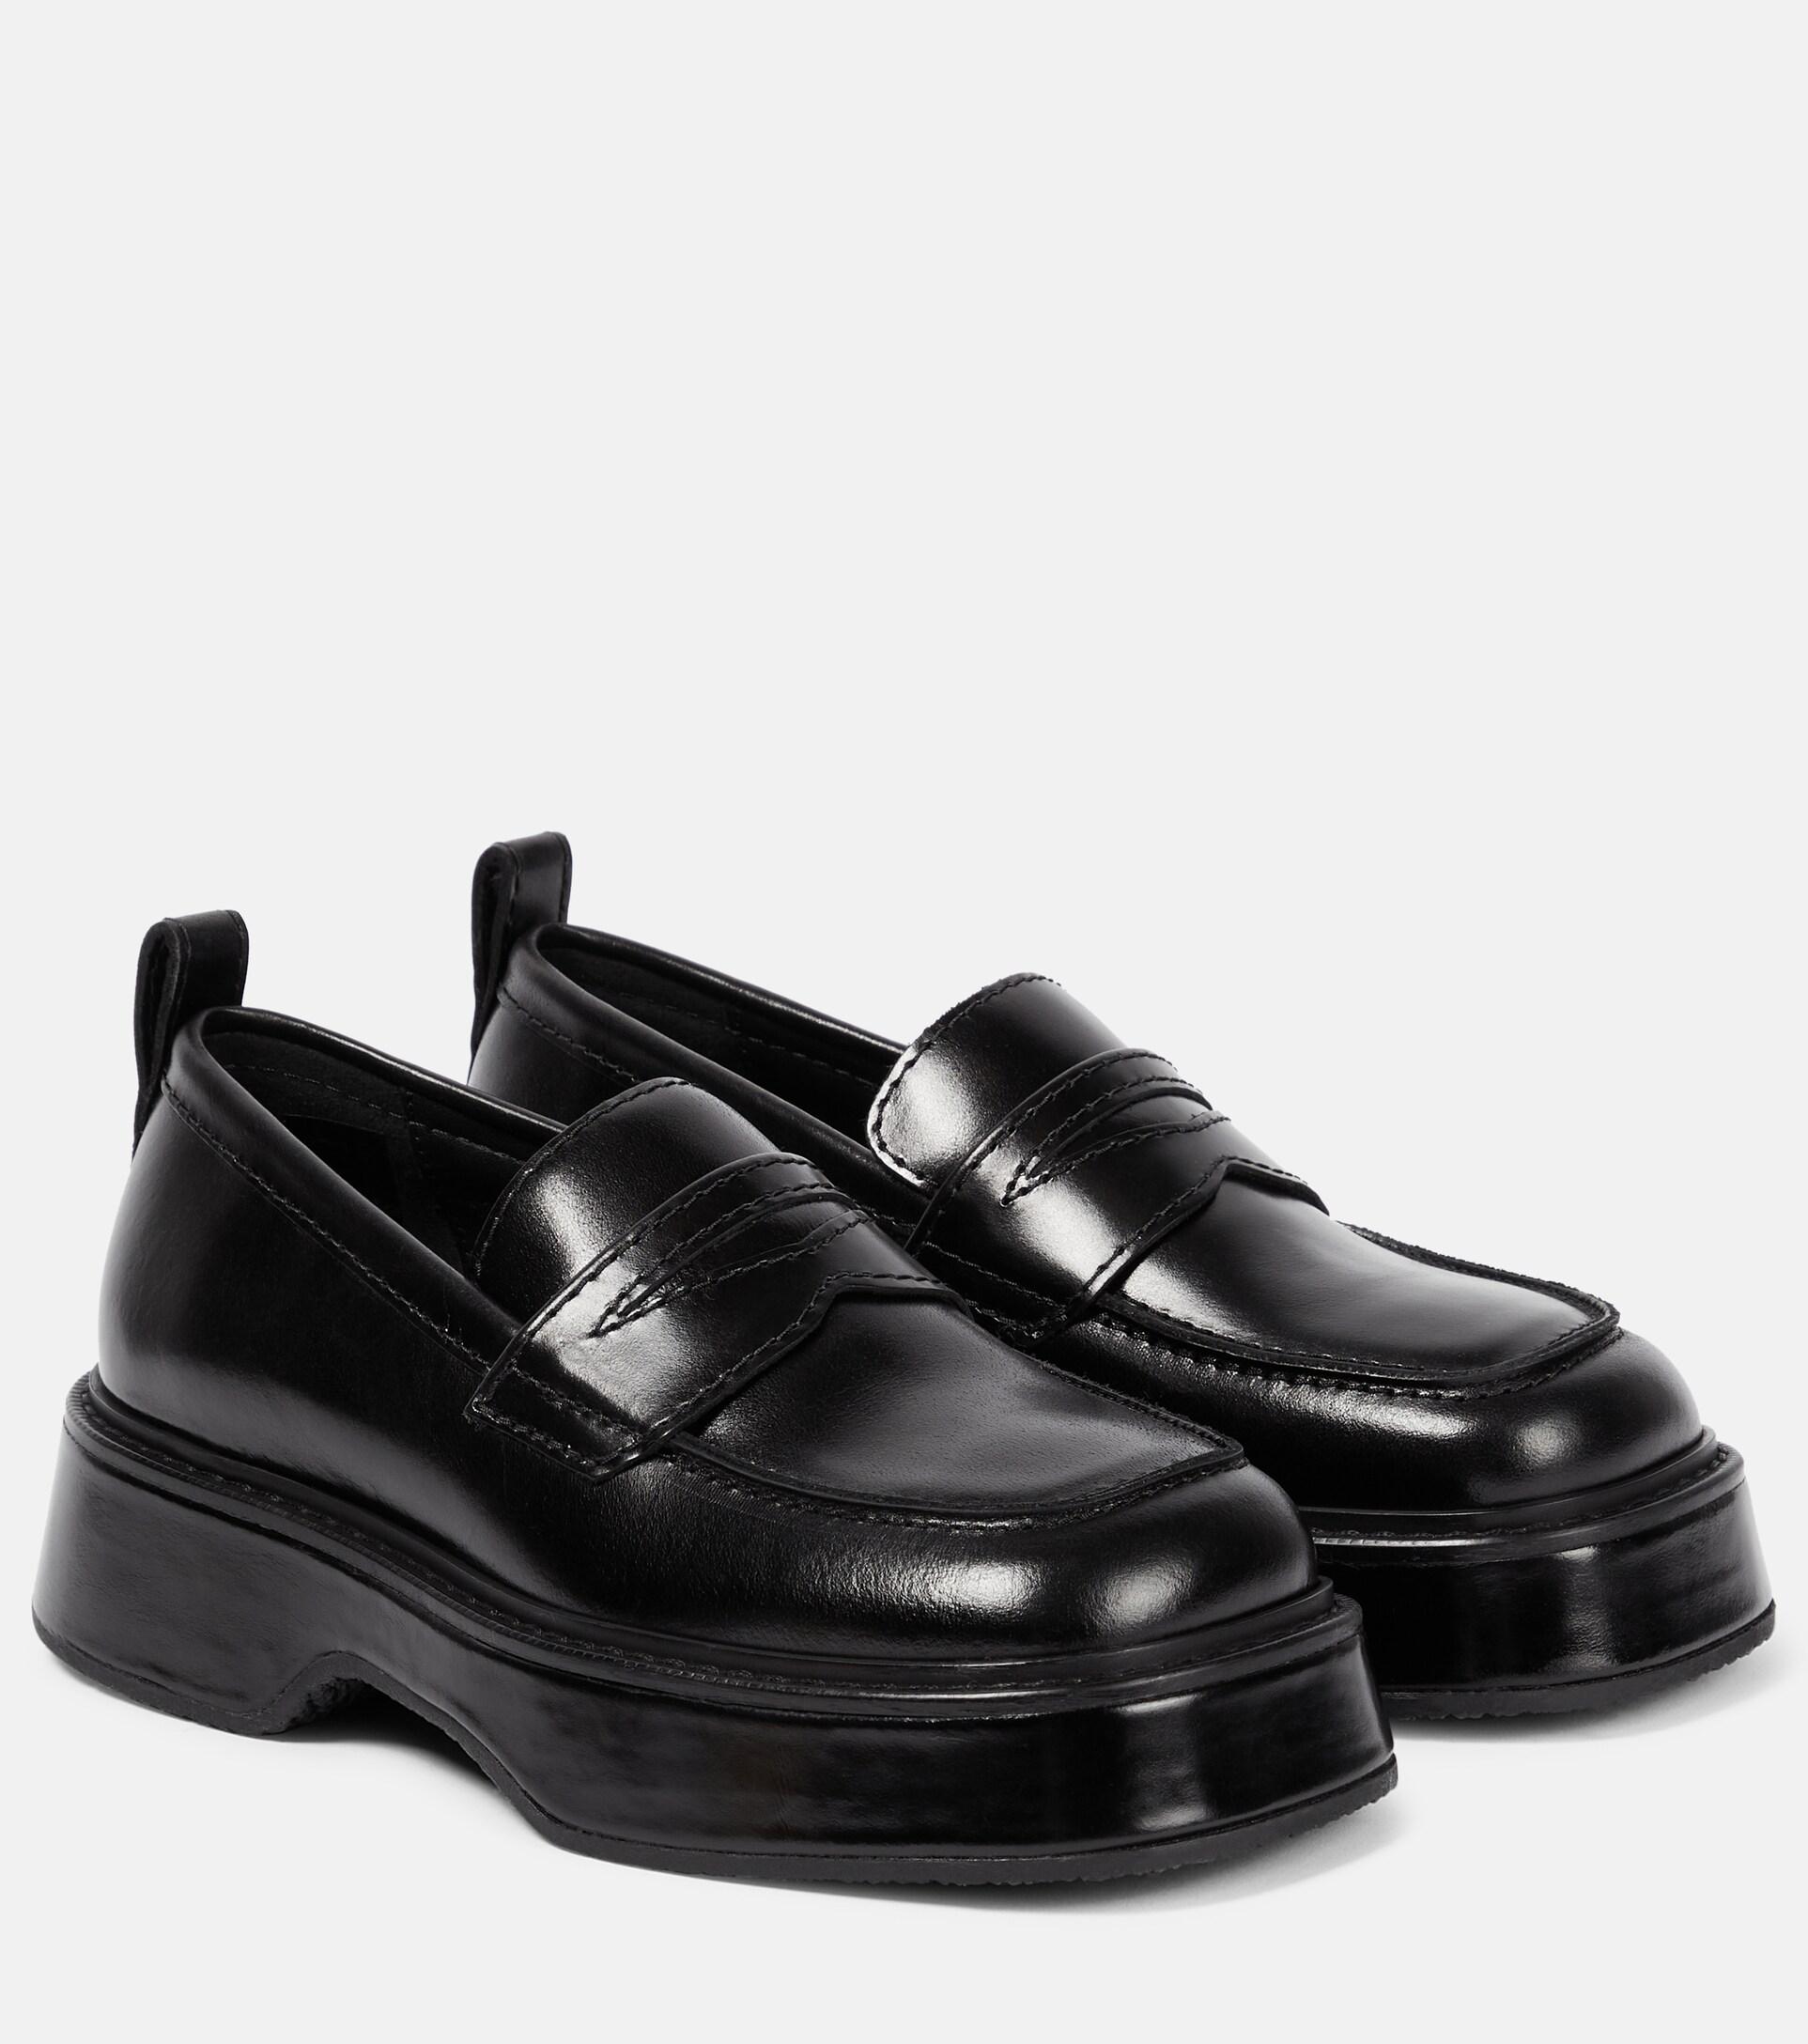 Ami Paris Leather Platform Loafers in Black | Lyst